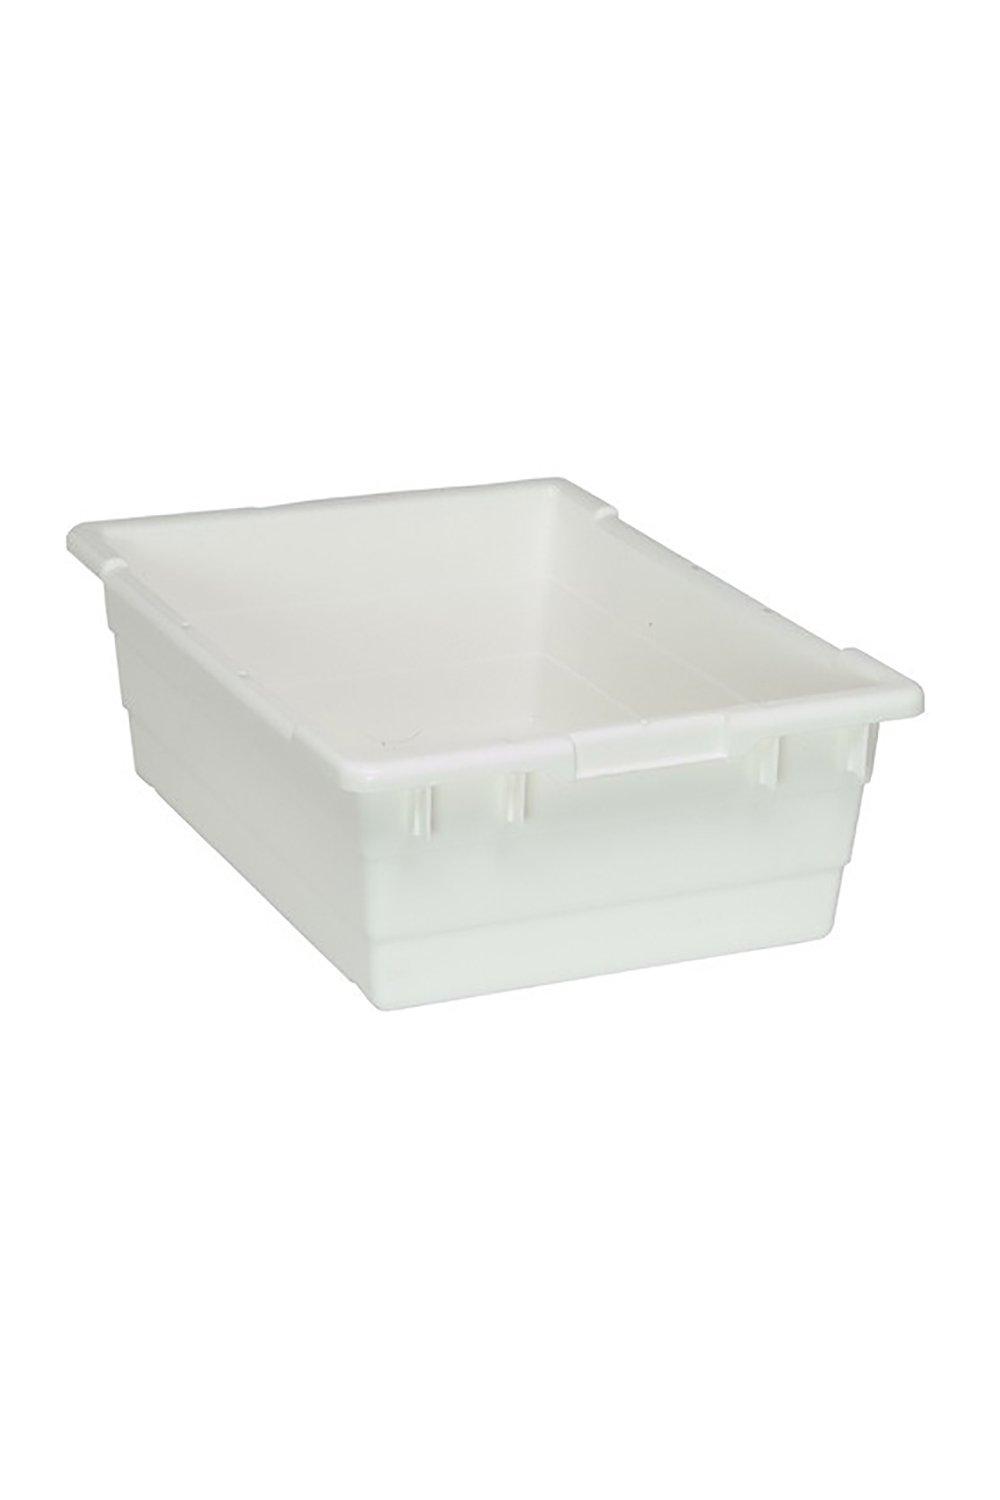 Cross Stack Tub Bins & Containers Acart 23-3/4"L x 17-1/4"W x 8"H White 